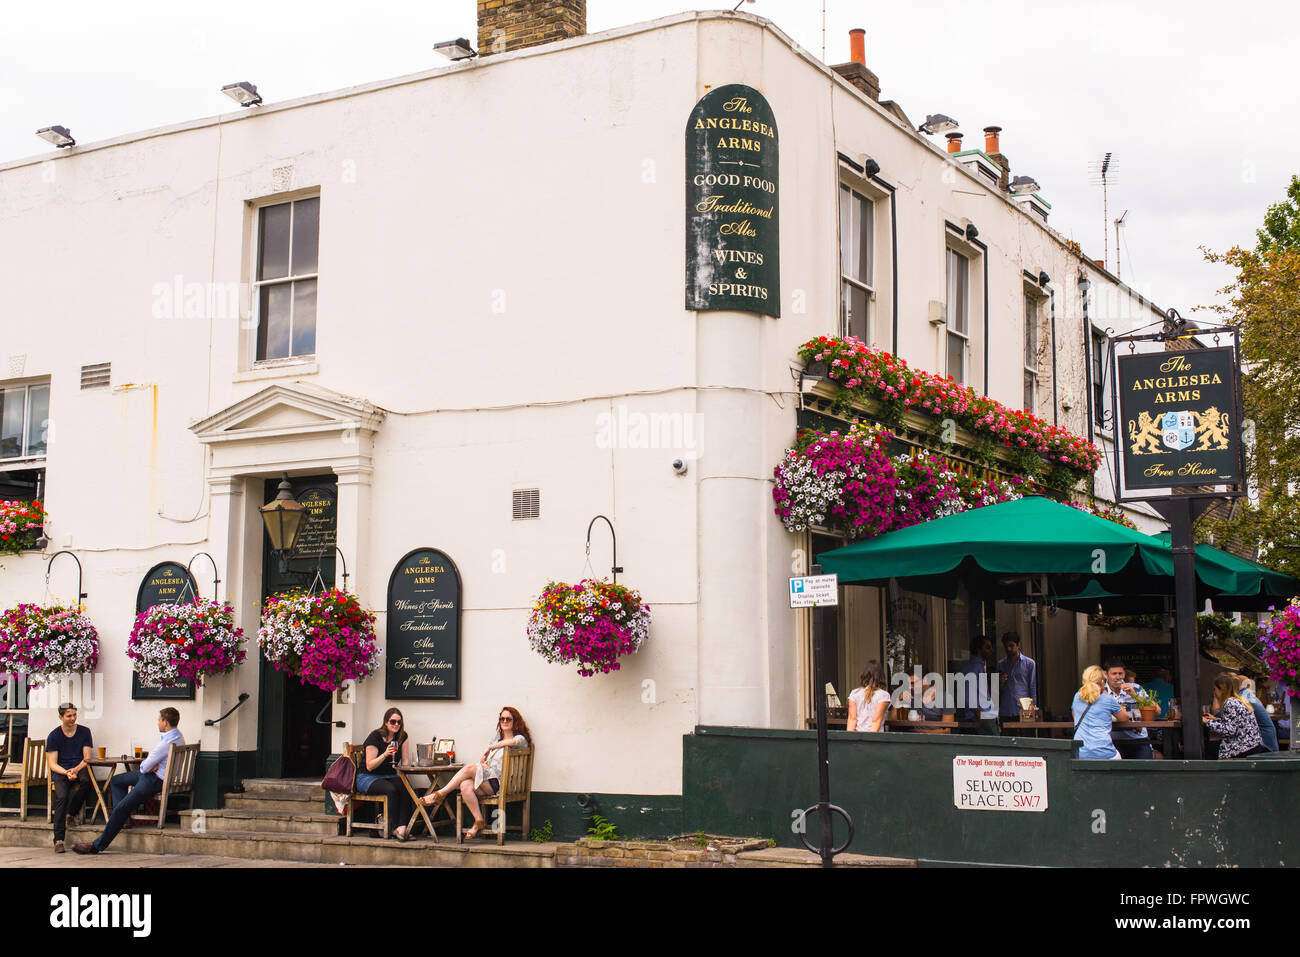 People enjoying the warm weather sitting outside a known pub in Chelsea Stock Photo